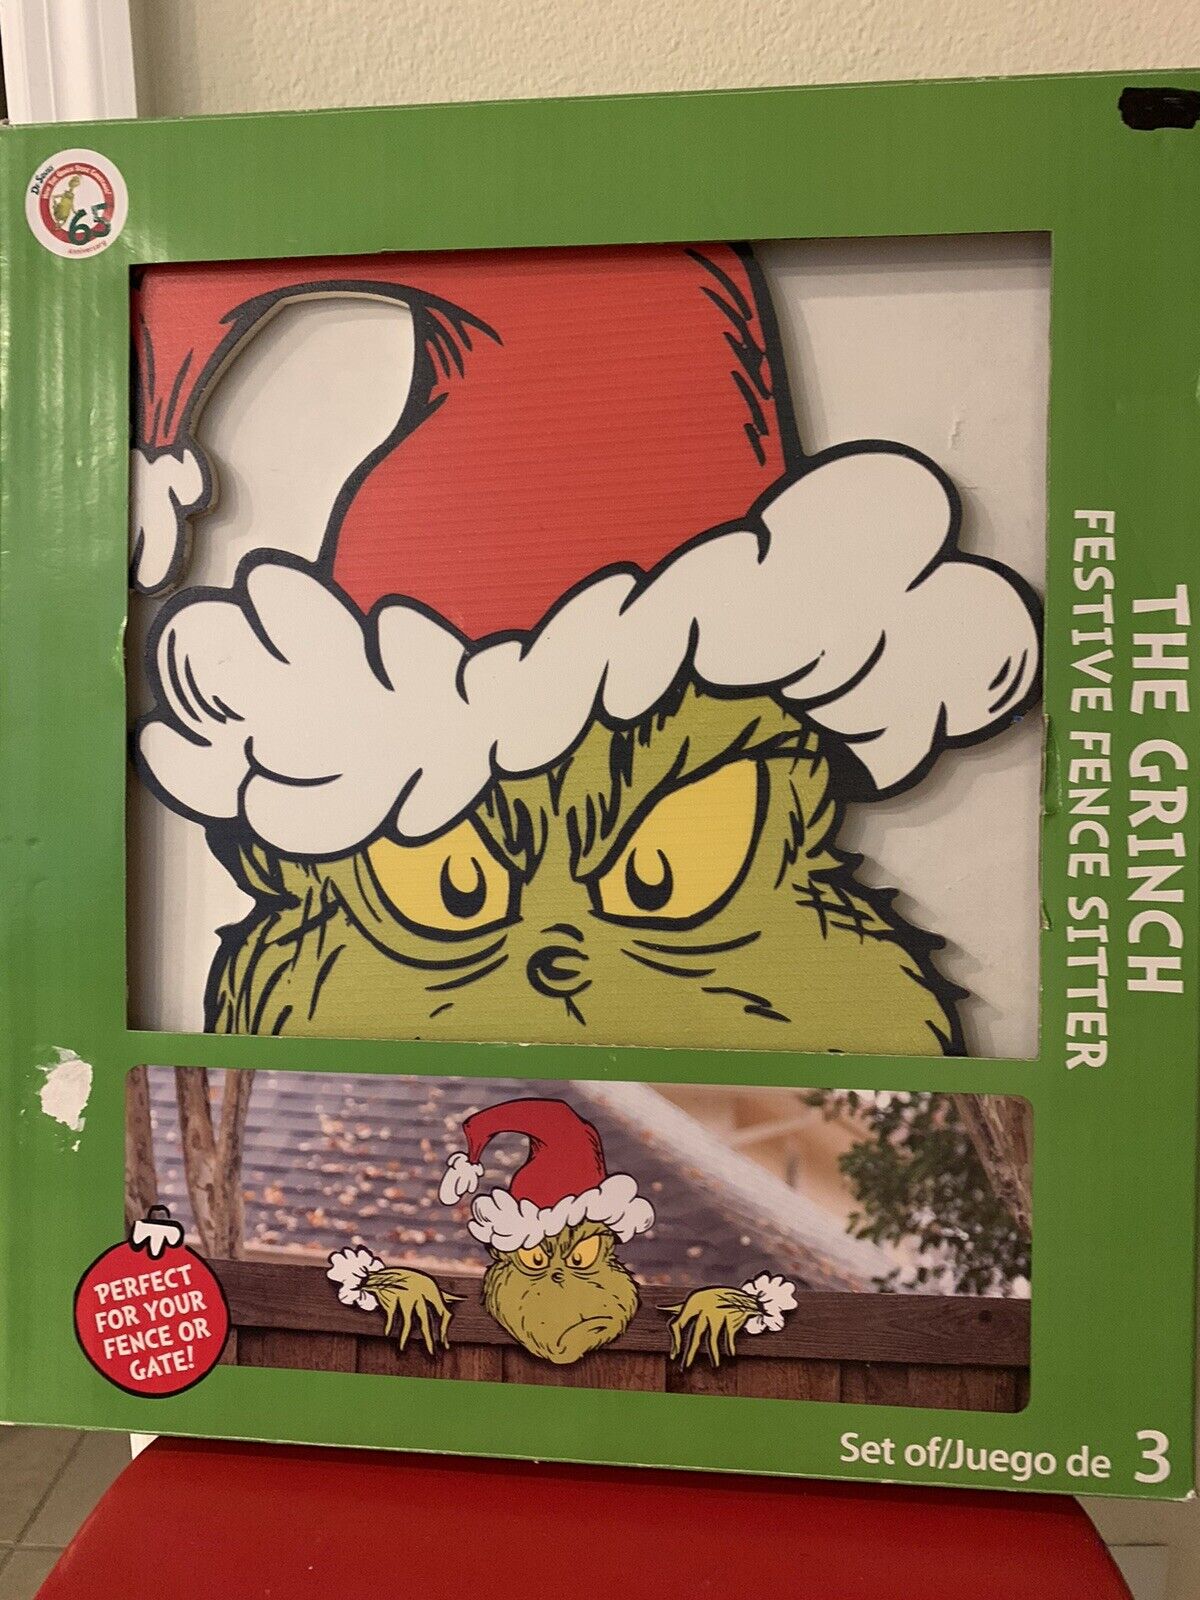 The Grinch Christmas Fence / Gate Sitter  Dr Seuss 18